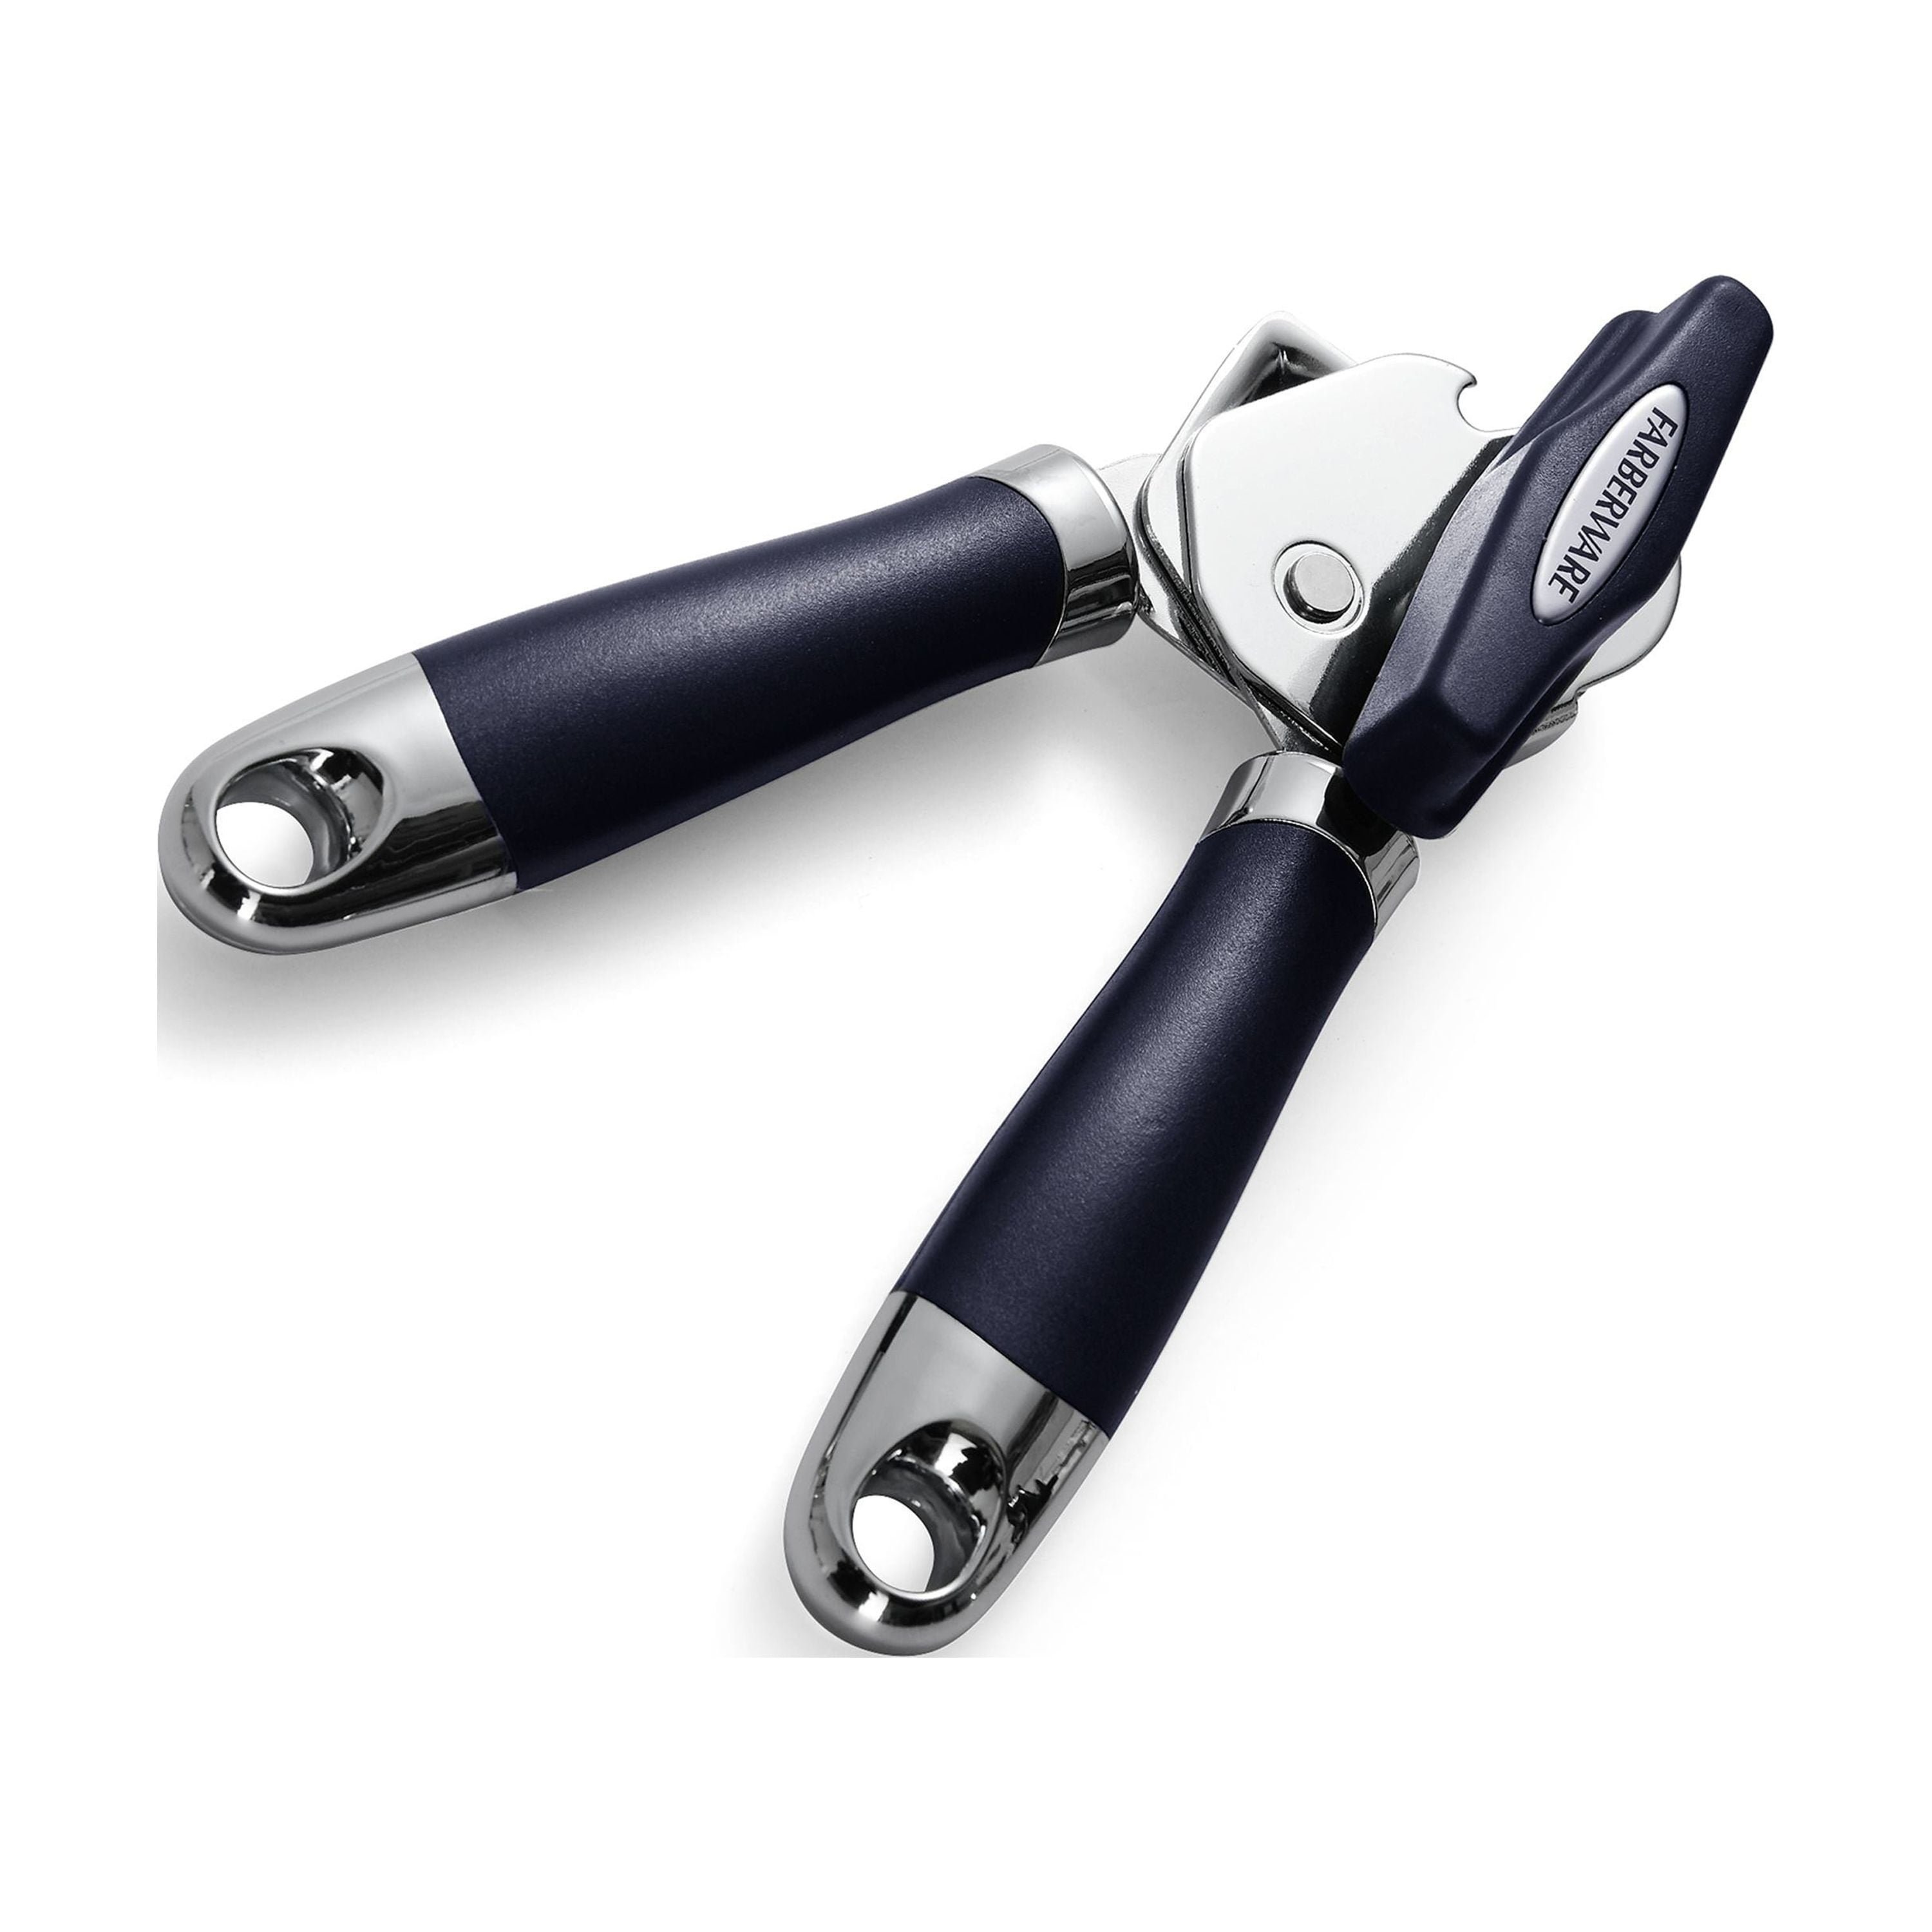 Farberware Professional 2 Stainless Steel Can Opener, Cushioned Ergonomic  Handles & Built In Bottle Opener, Berry